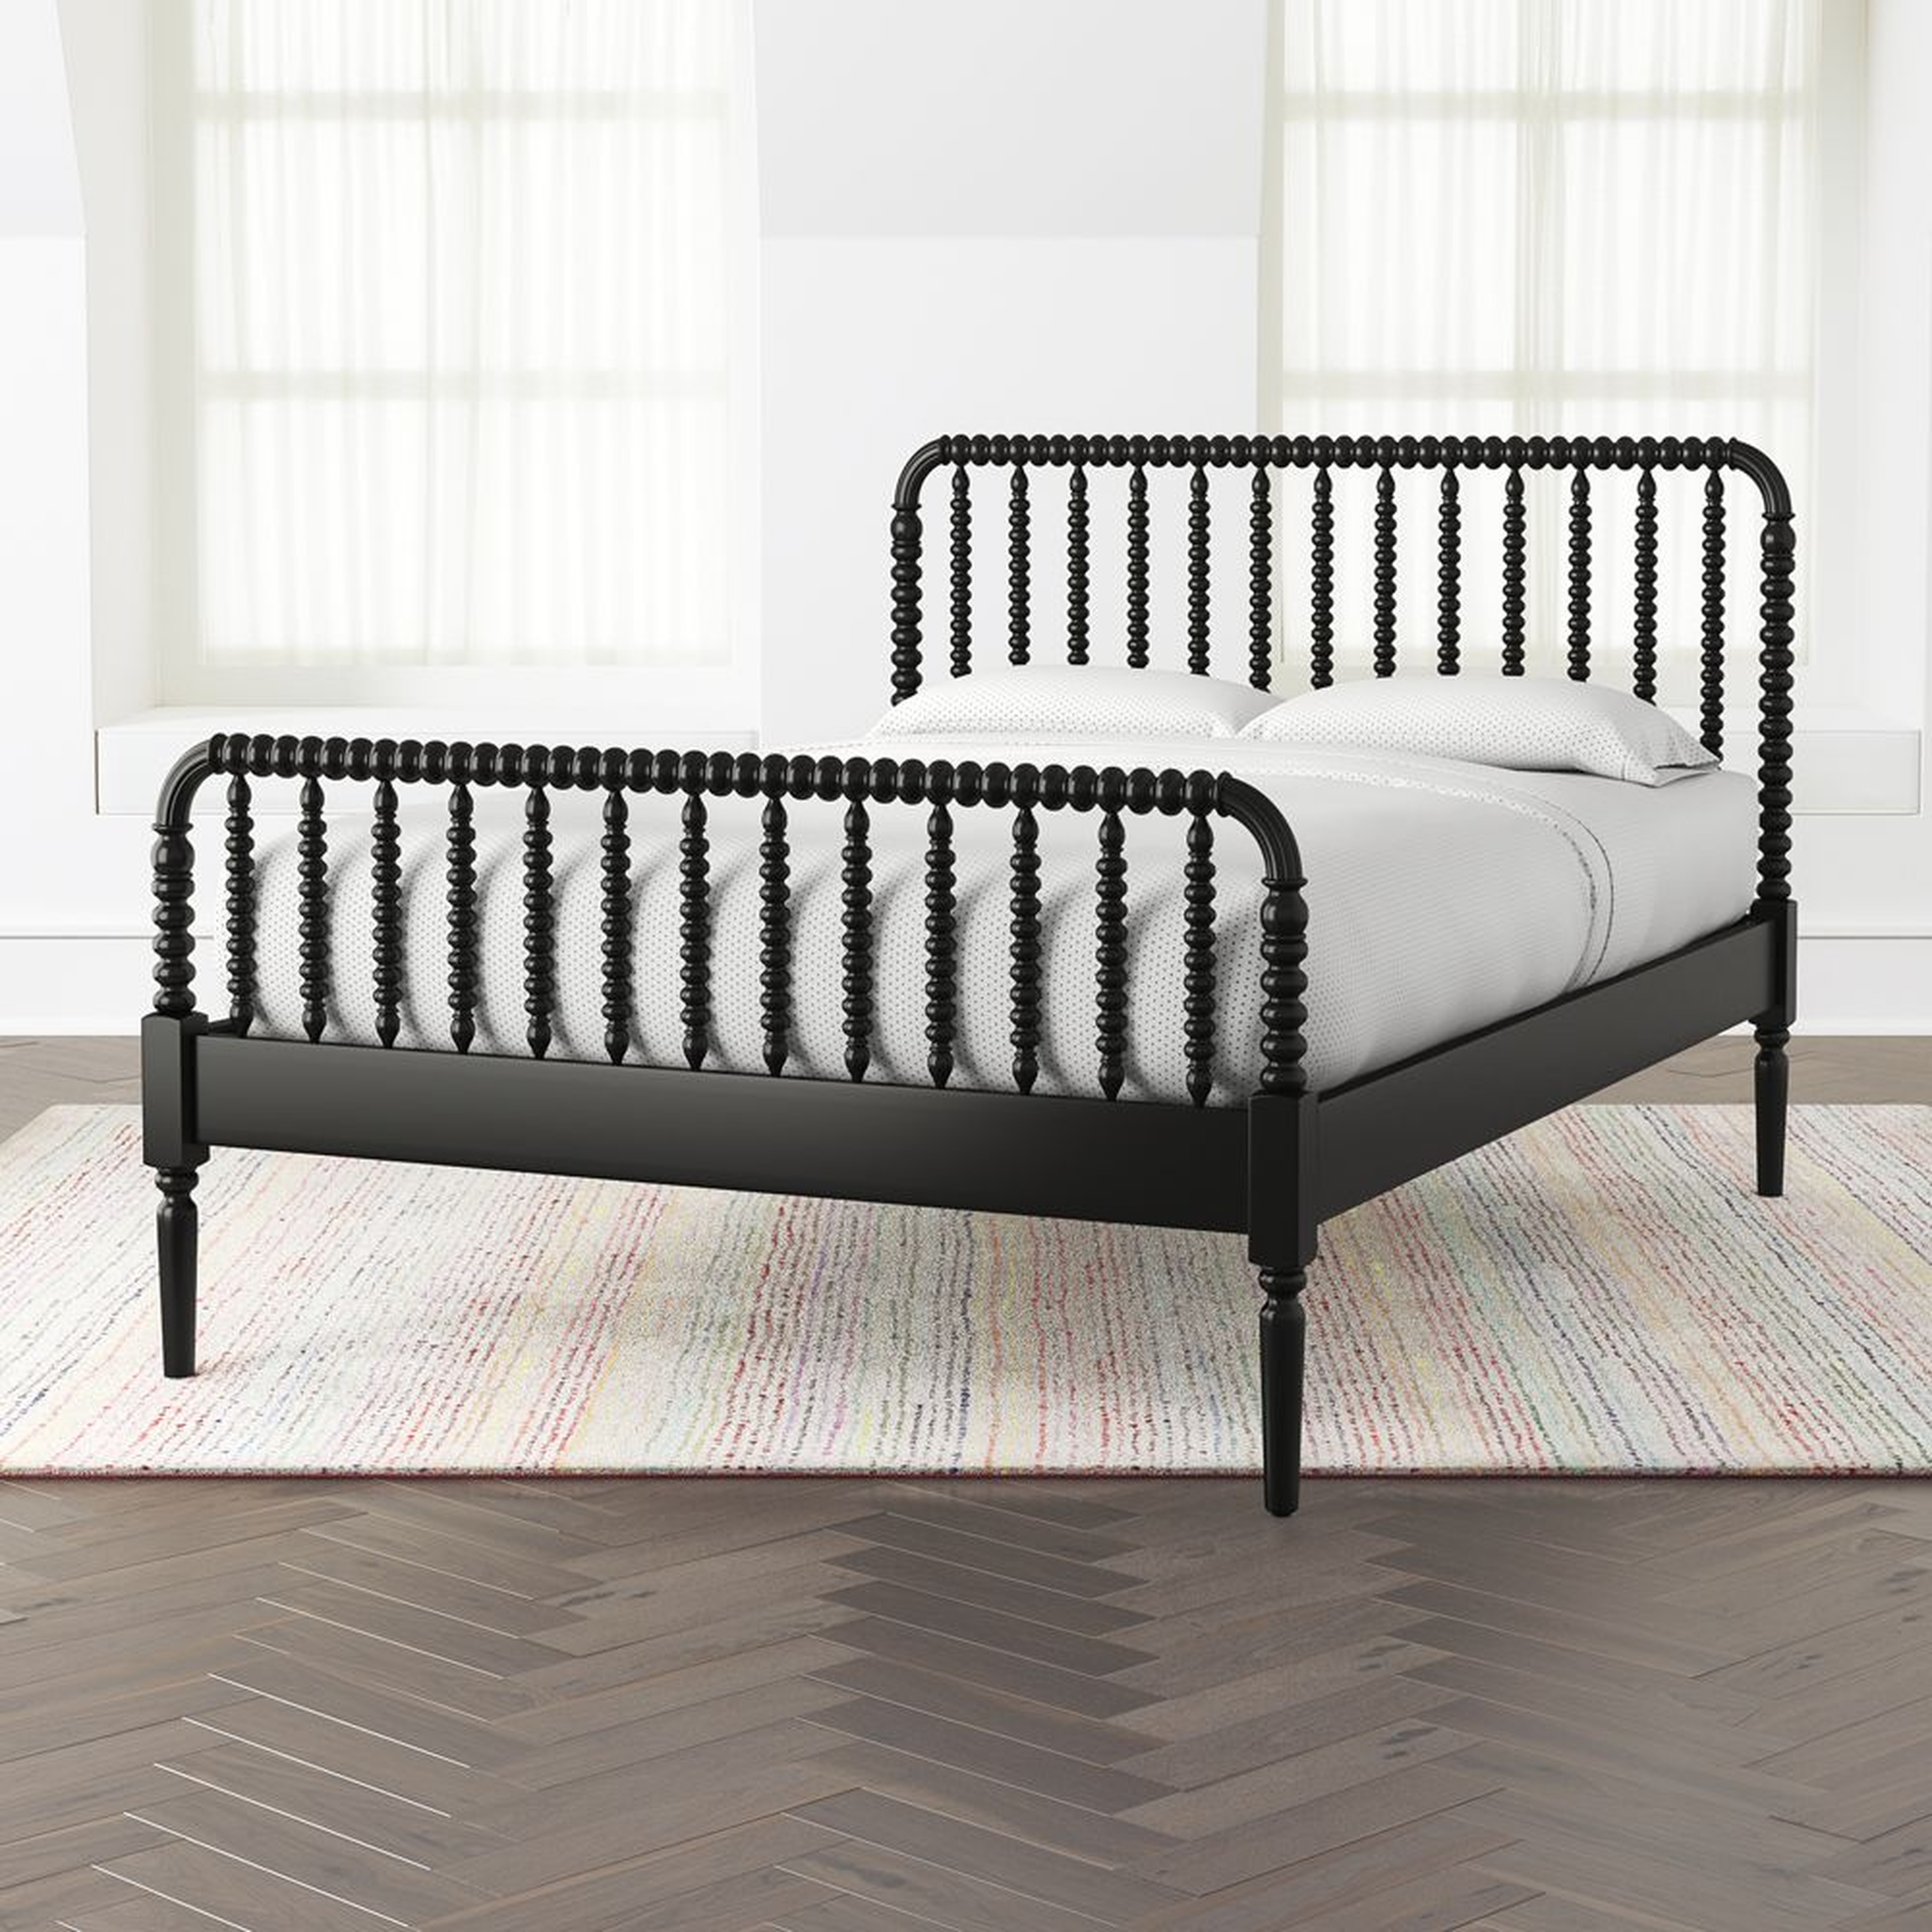 Jenny Lind Black Full Bed - Crate and Barrel